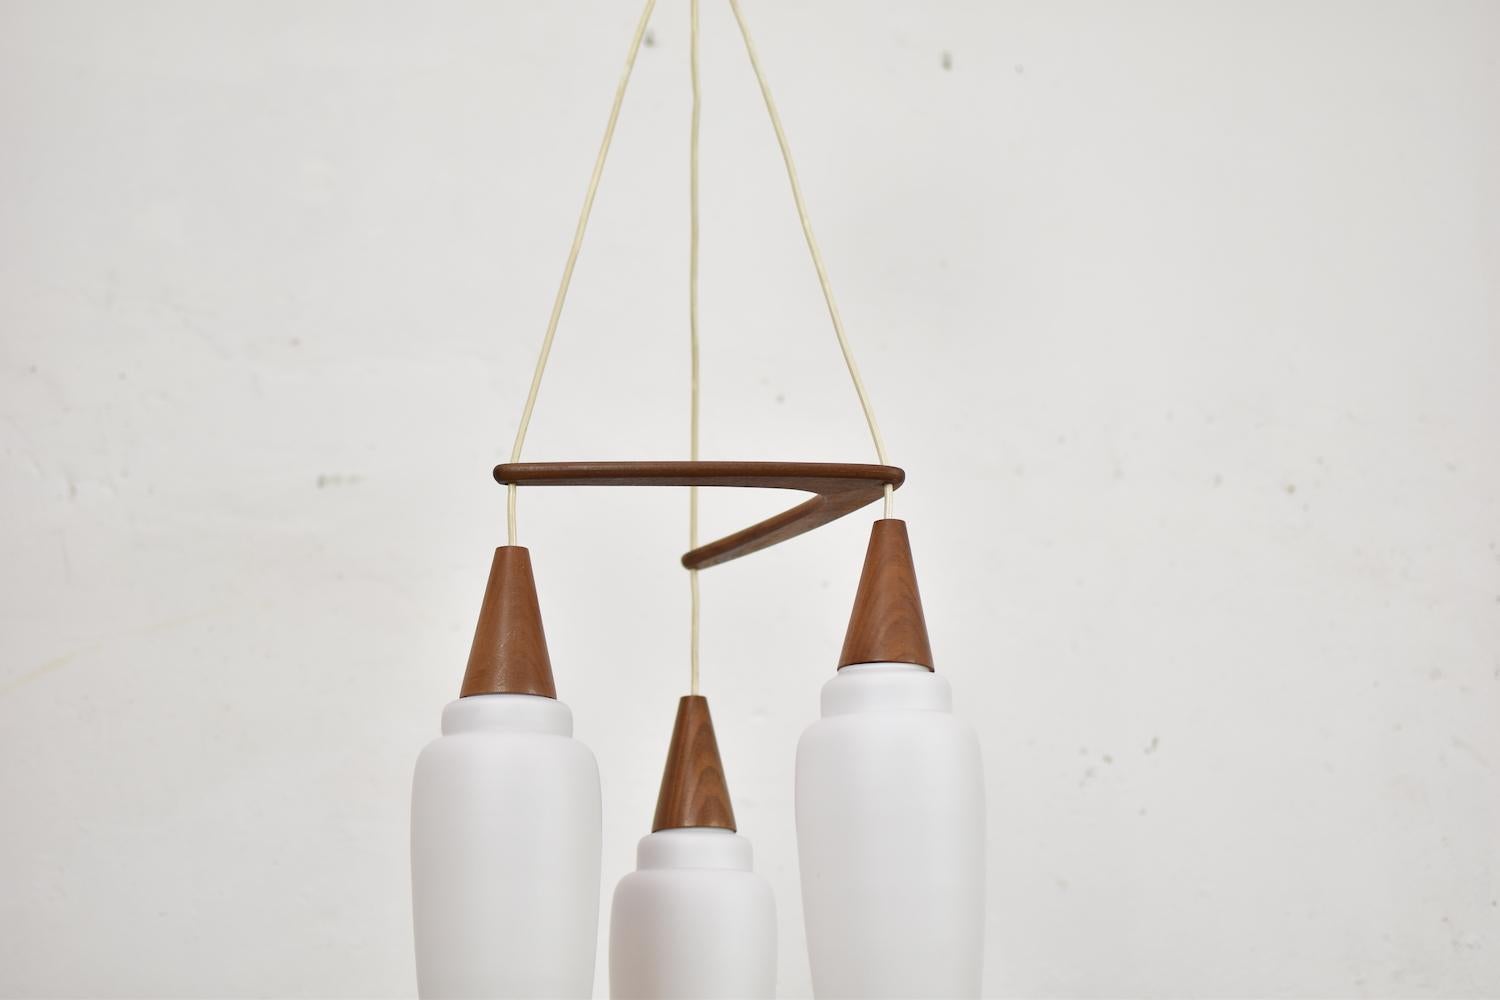 Mid-Century Modern pendant by Philips, The Netherlands, 1950s. This ‘Boomerang’ pendant is made out of teak and three opale glass shades. Very good original condition.